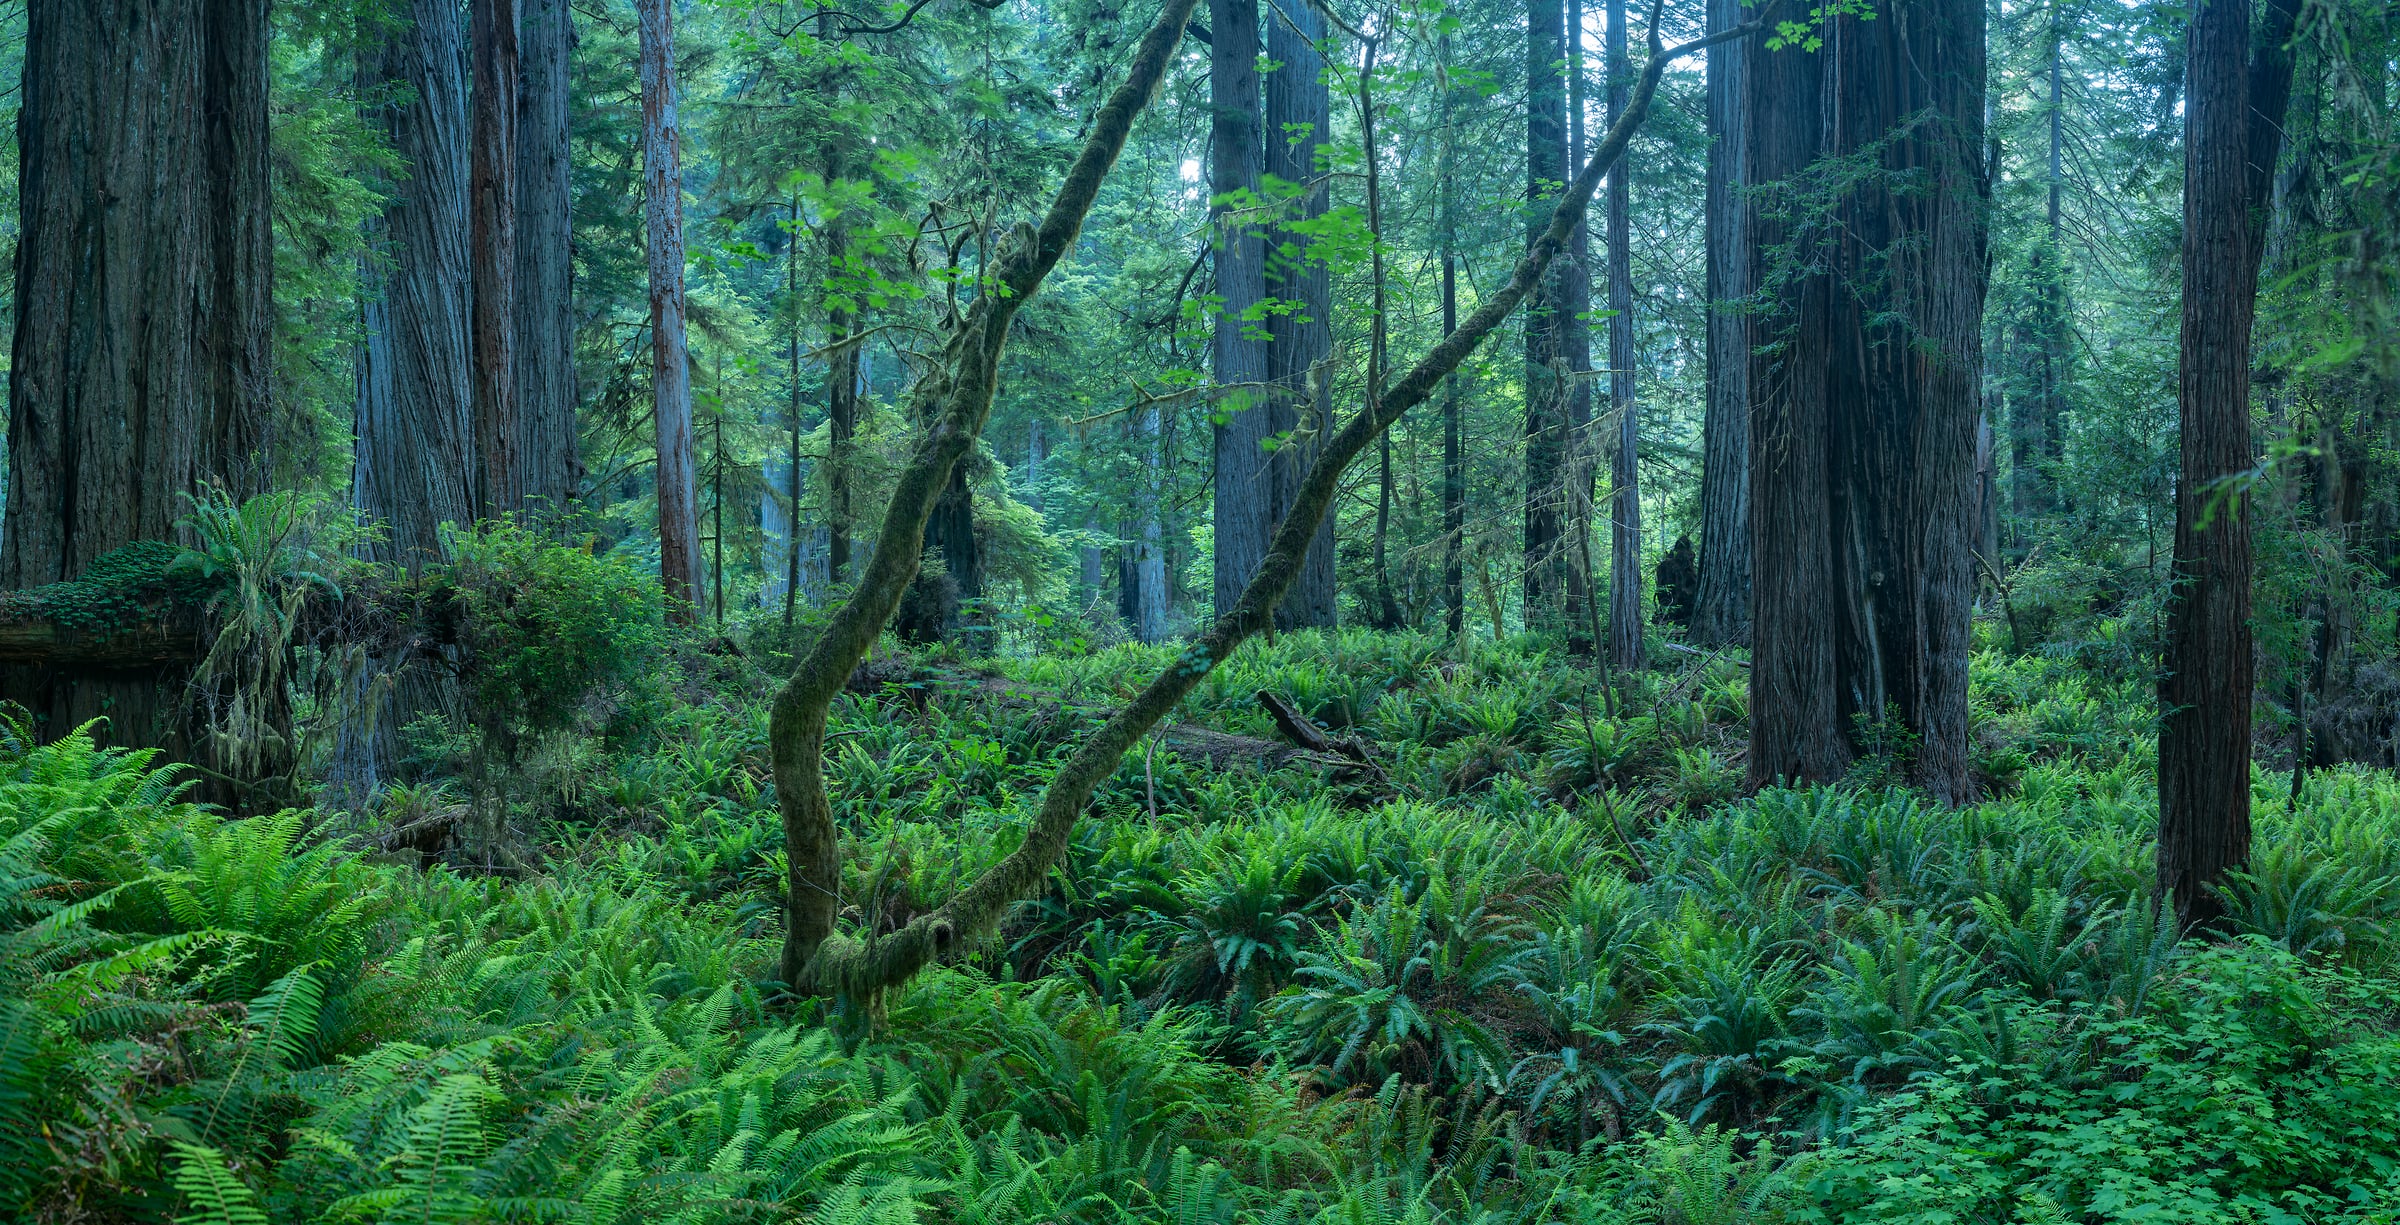 494 megapixels! A very high resolution, large-format VAST photo print of a lush redwood forest; nature photograph created by Greg Probst in Prairie Creek Redwoods State Park, California.